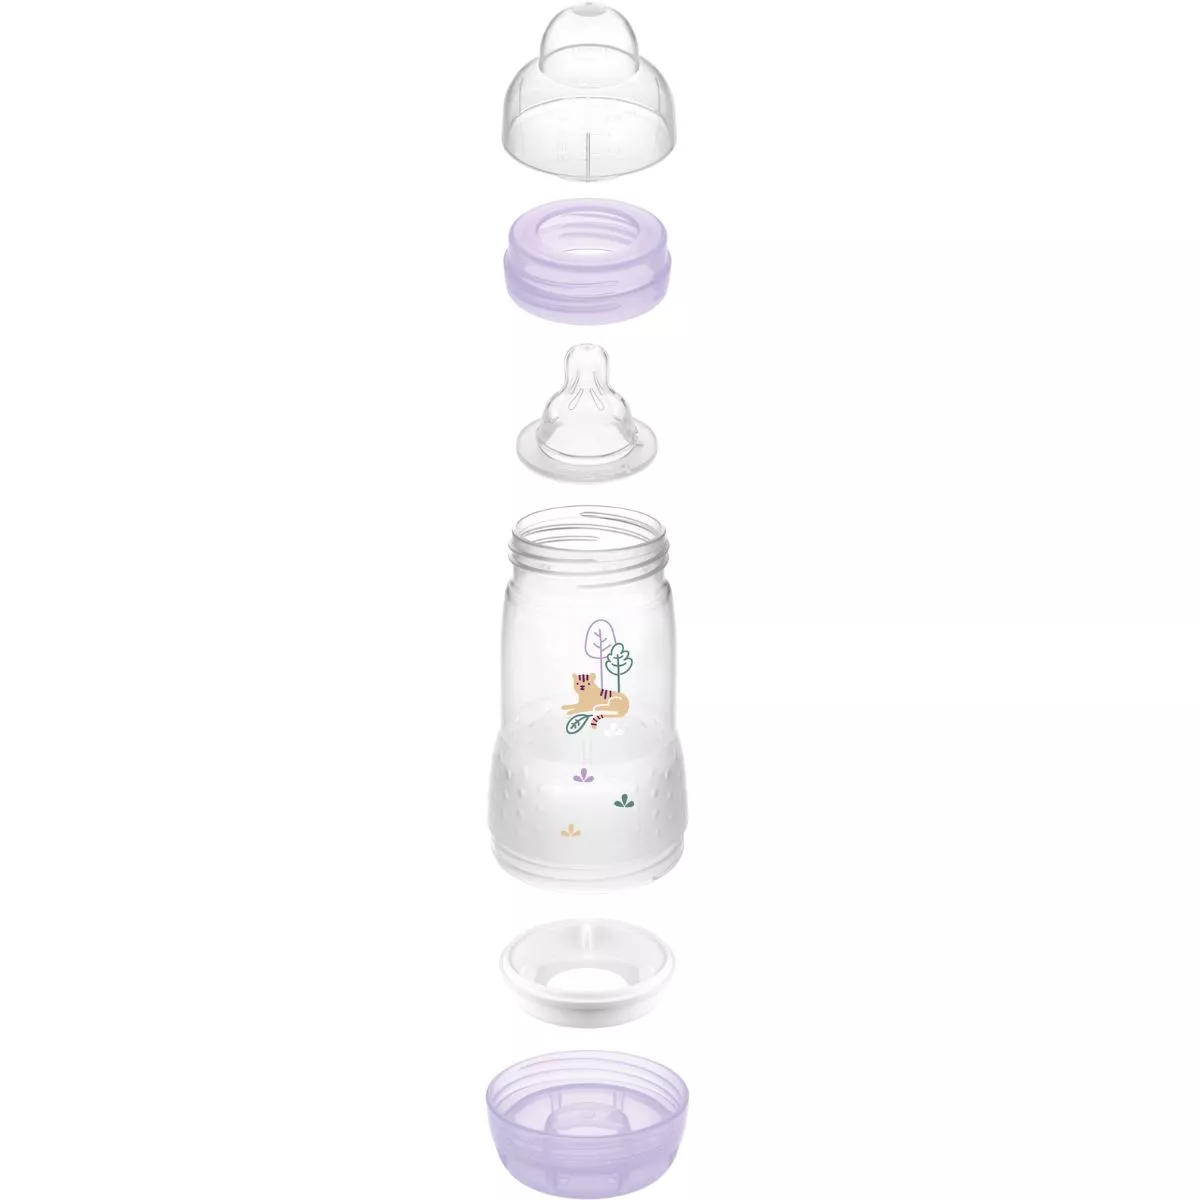 Anti-Colic 130ml Colors of Nature 